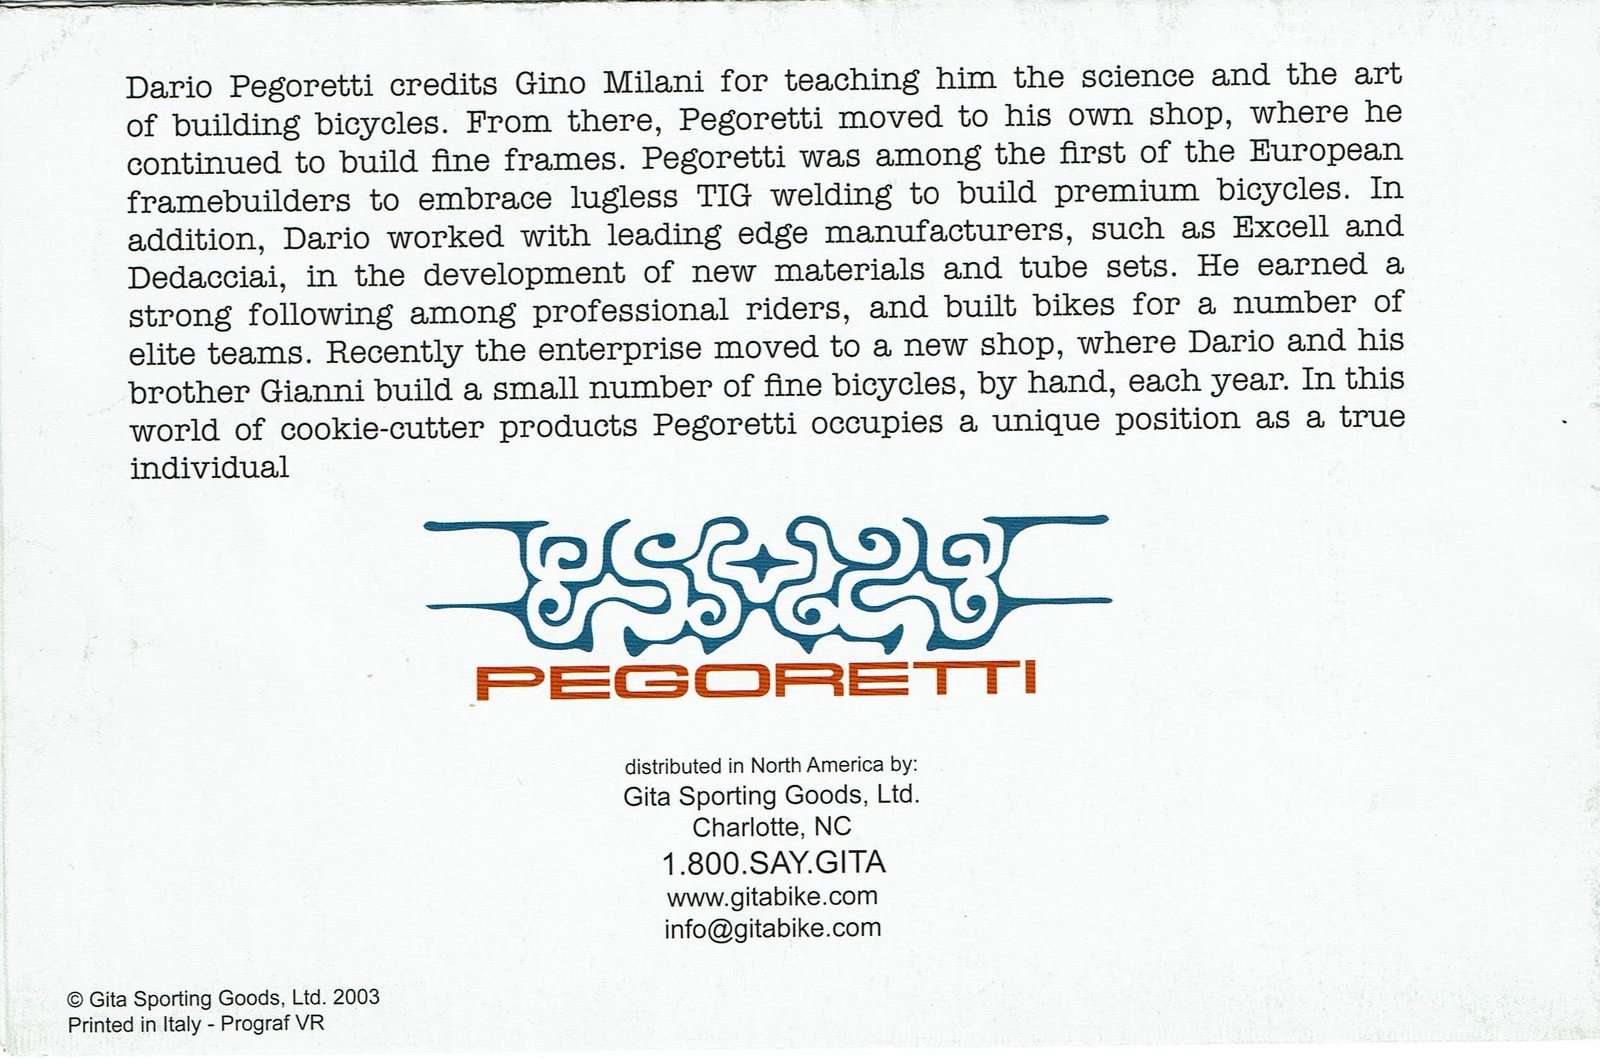 Back Cover from the 2004 Pegoretti catalog